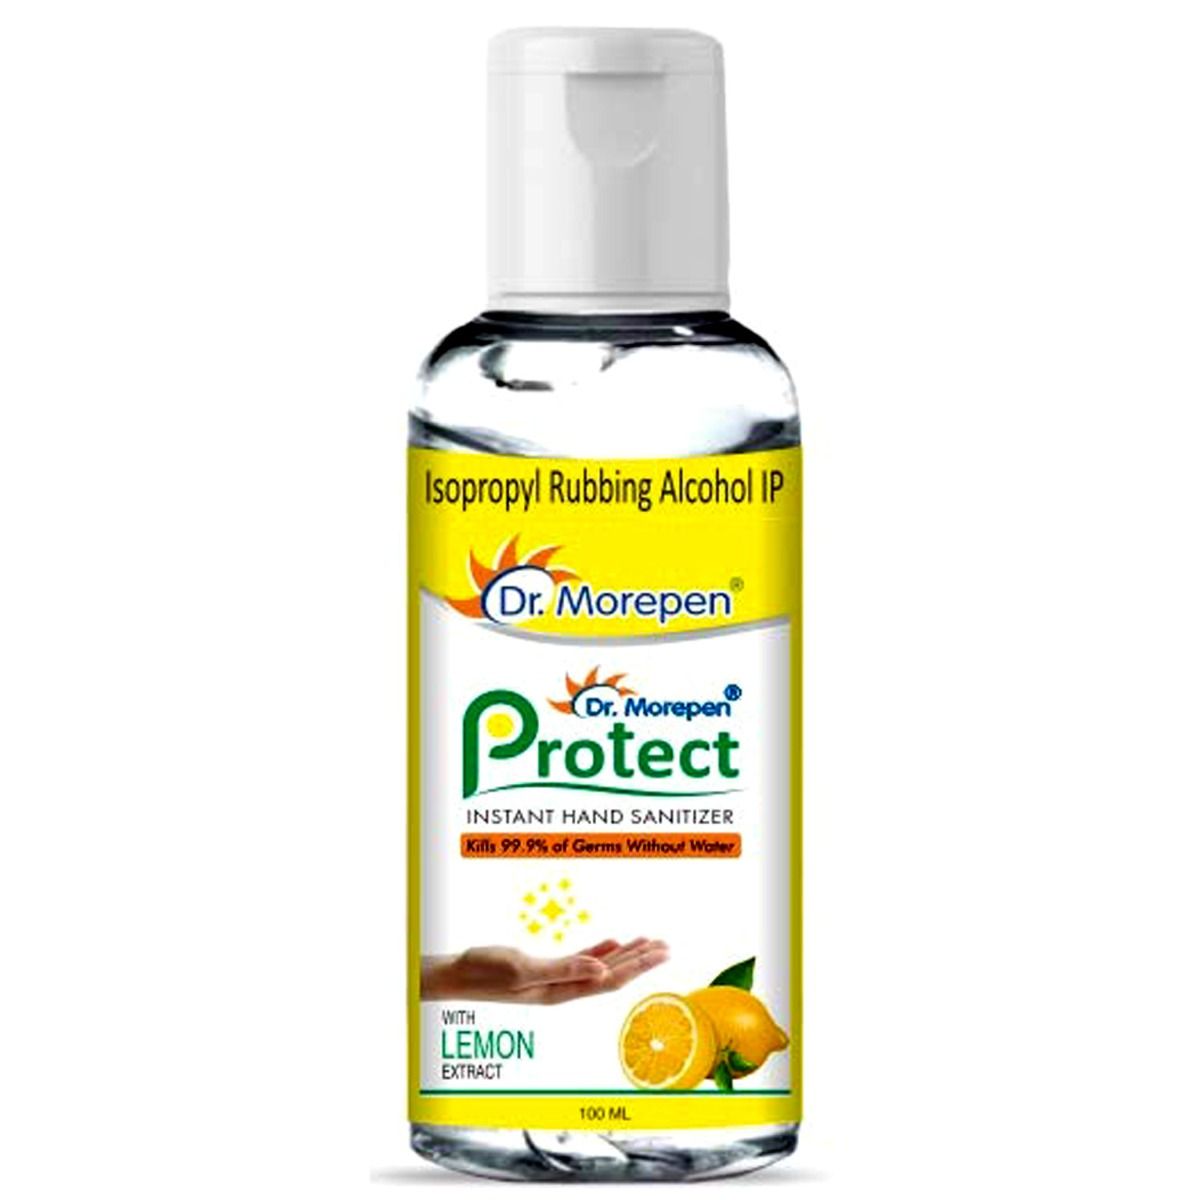 Dr. Morpen Protect Lemon Extract Instant Hand Sanitizer, 100 ml, Pack of 1 